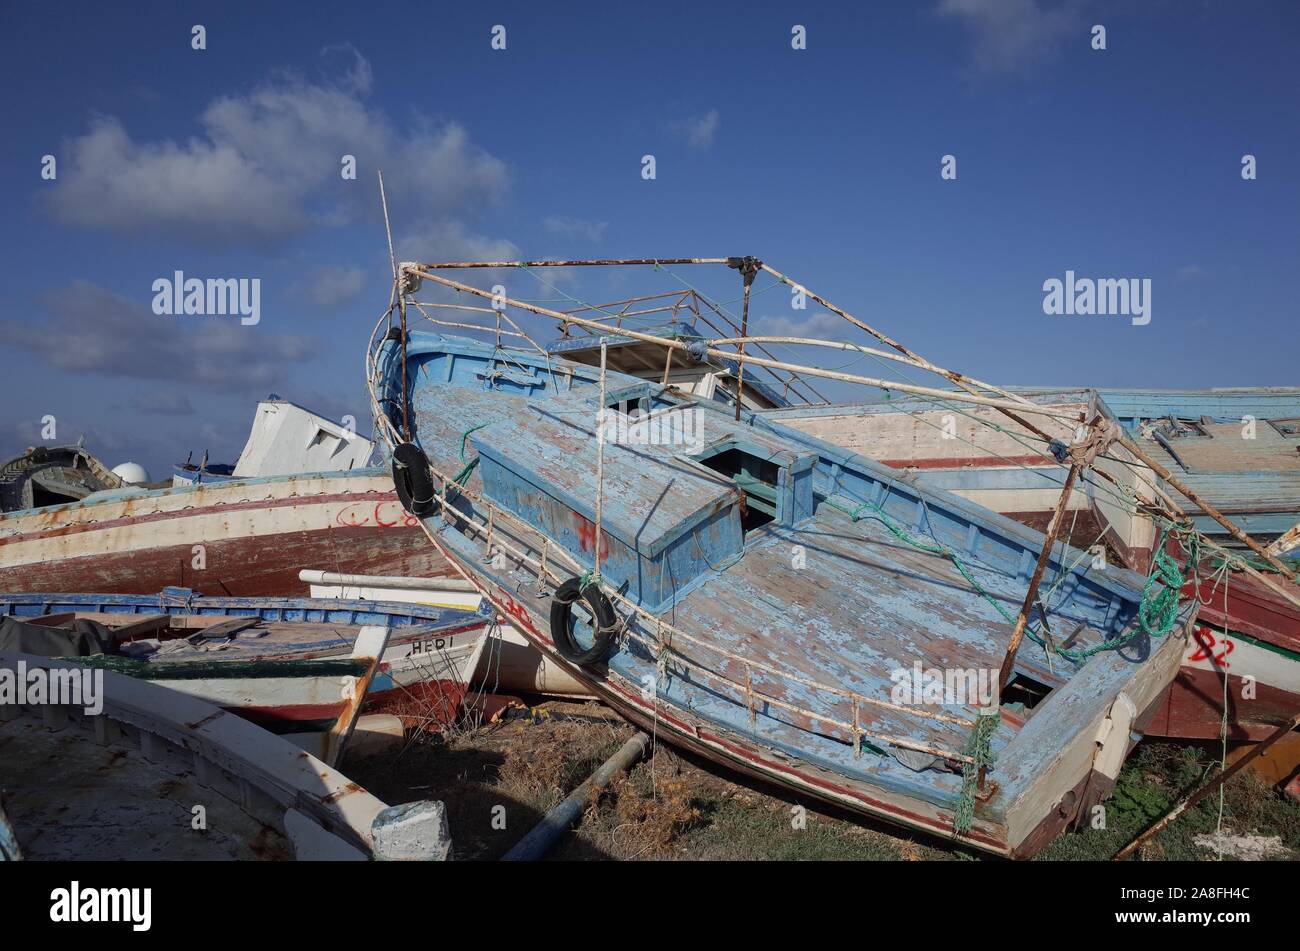 *** STRICTLY NO SALES TO FRENCH MEDIA OR PUBLISHERS *** October 21, 2019 - Lampedusa, Italia: Several boats used by migrants to cross the Mediterranean between North Africa and the Italian island of Lampedusa are abandoned in a 'boat cemetery'. Most are small Tunisian fishing vessels. Cimetiere de bateaux de migrants a Lampedusa. Stock Photo